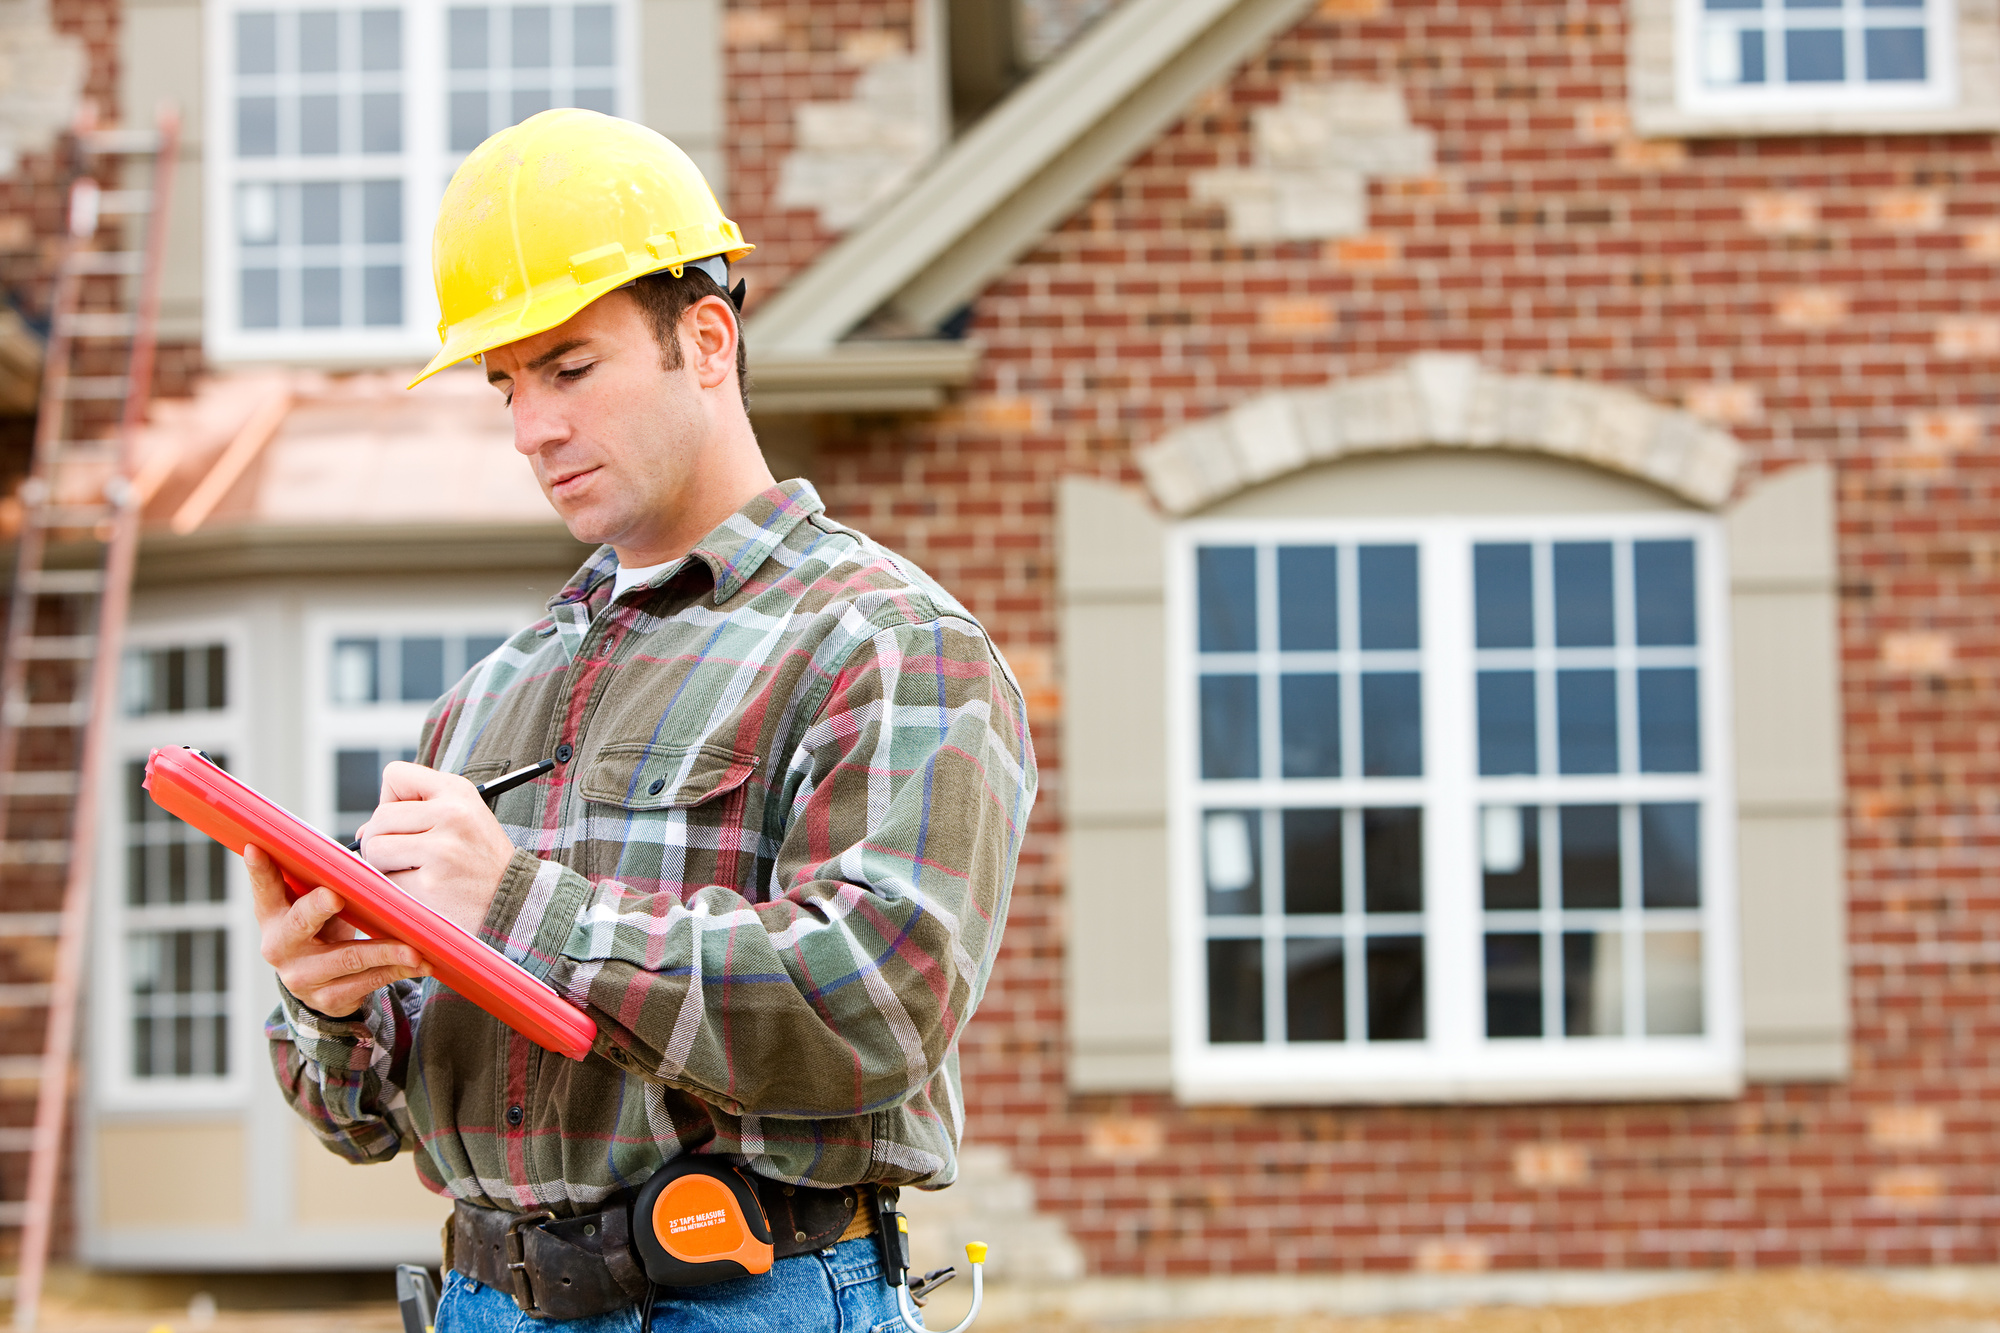 Finding the best roofing company in Little Rock